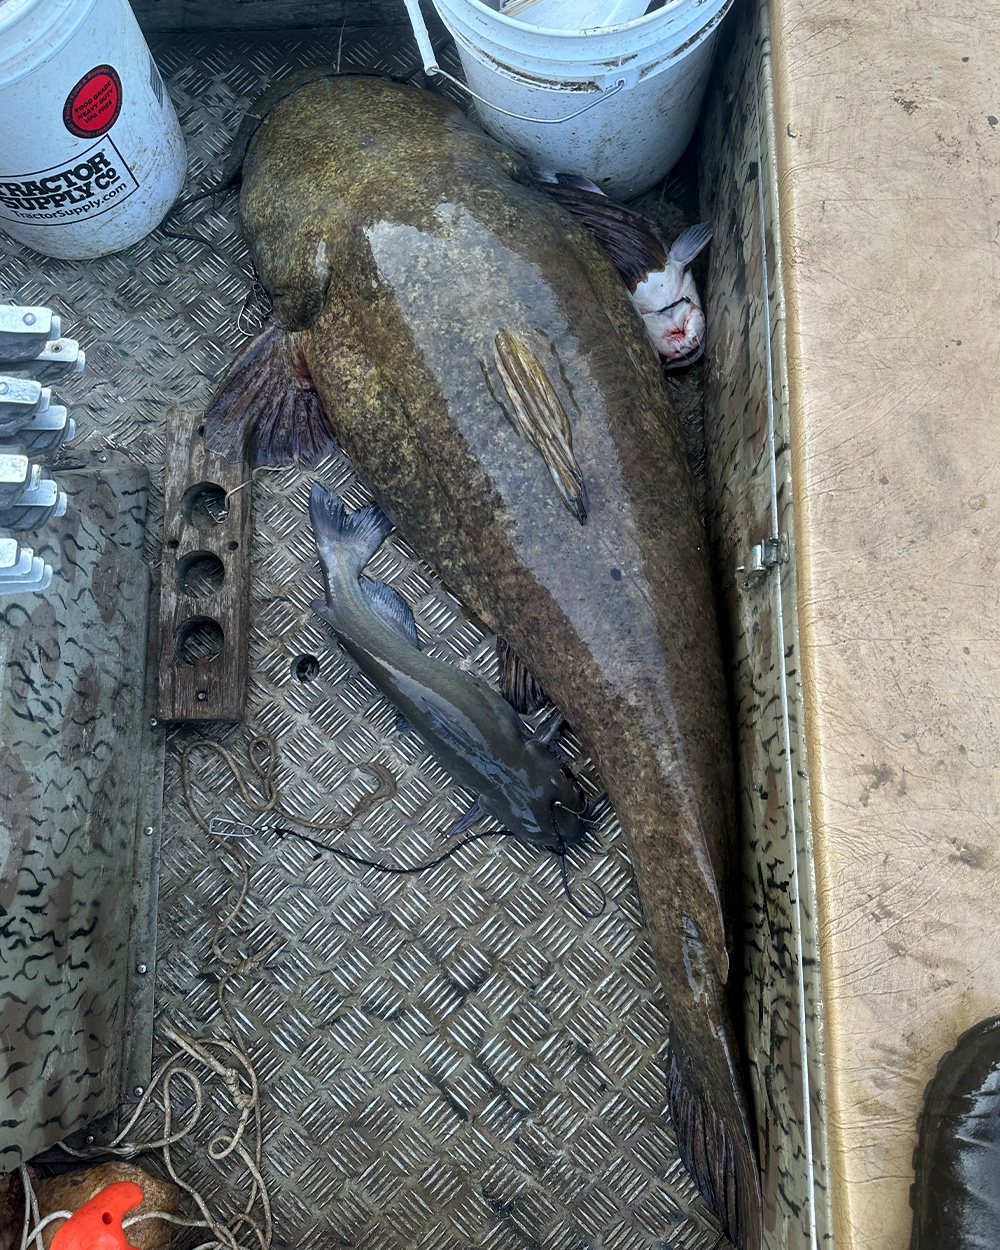 A big flathead catfish in the bottom of a boat.